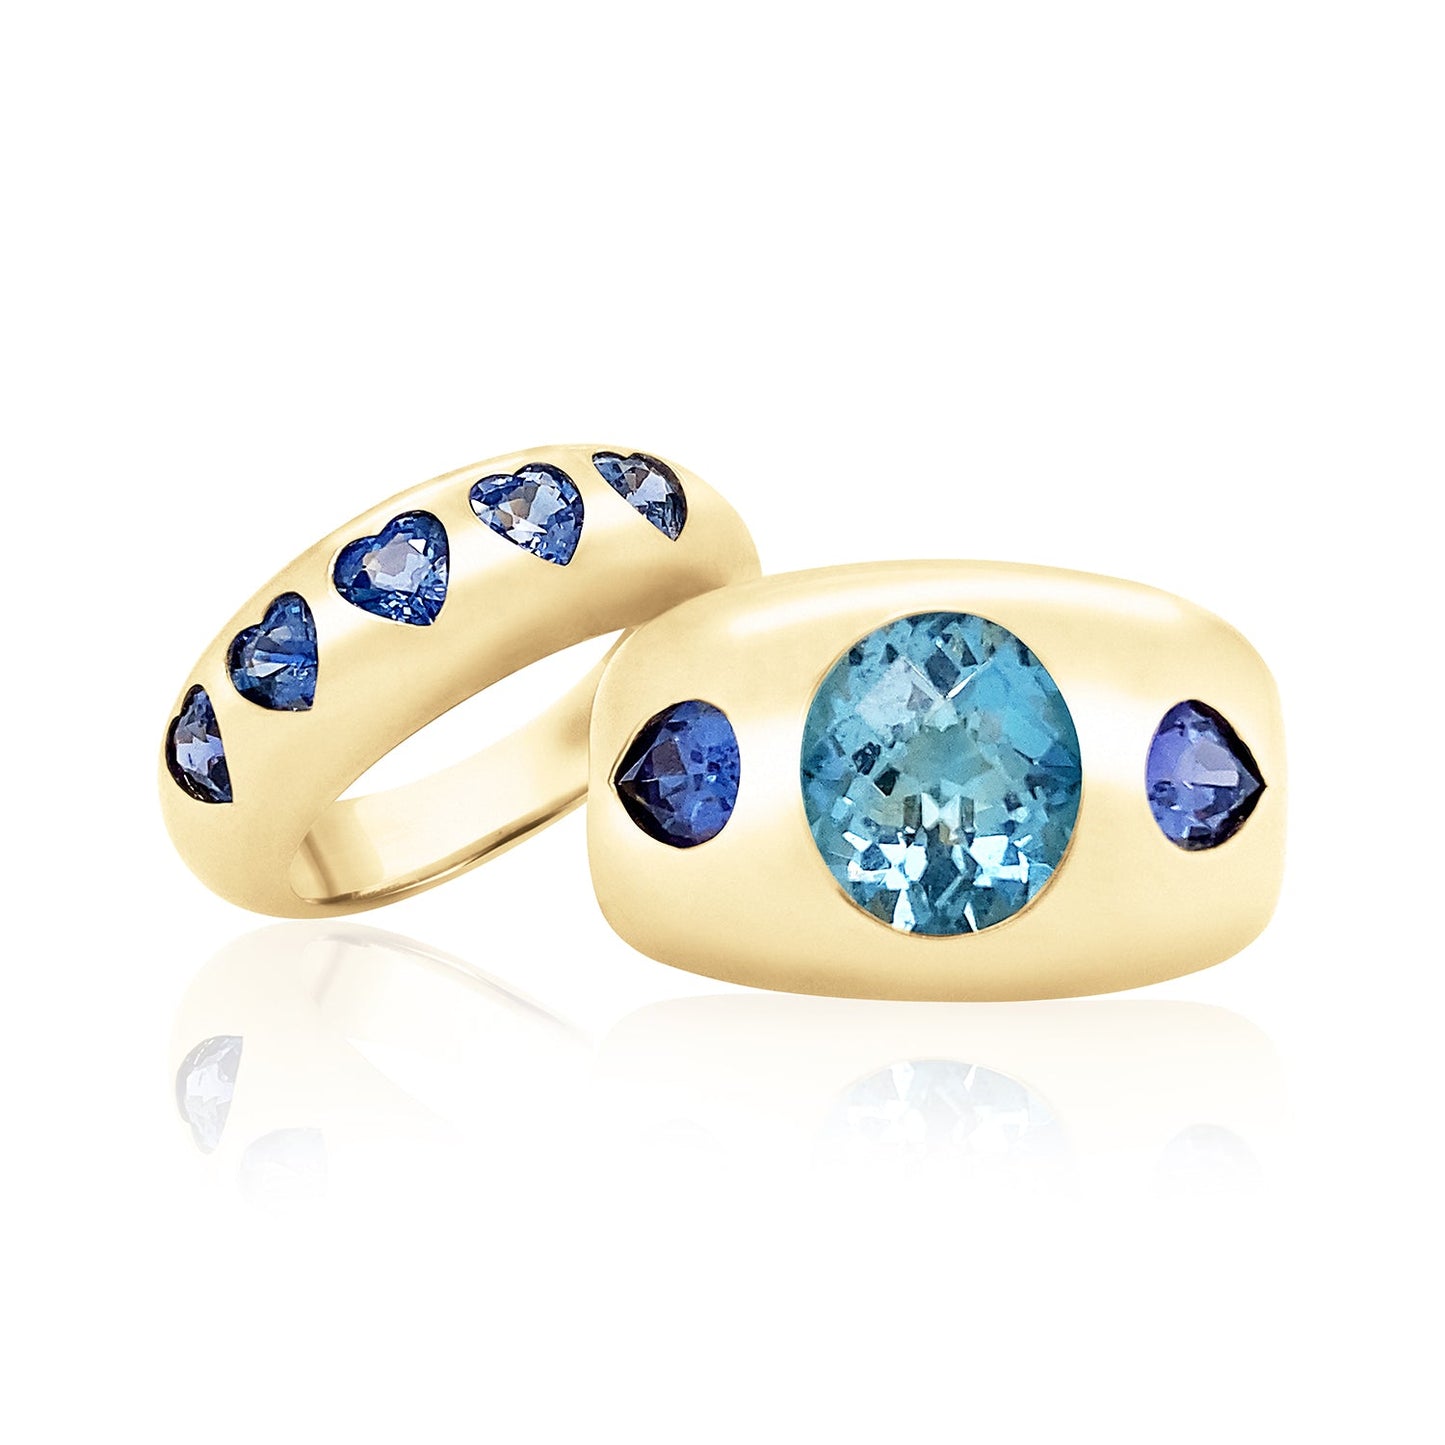 Nomad Ring - Ombre Blue Sapphire Hearts